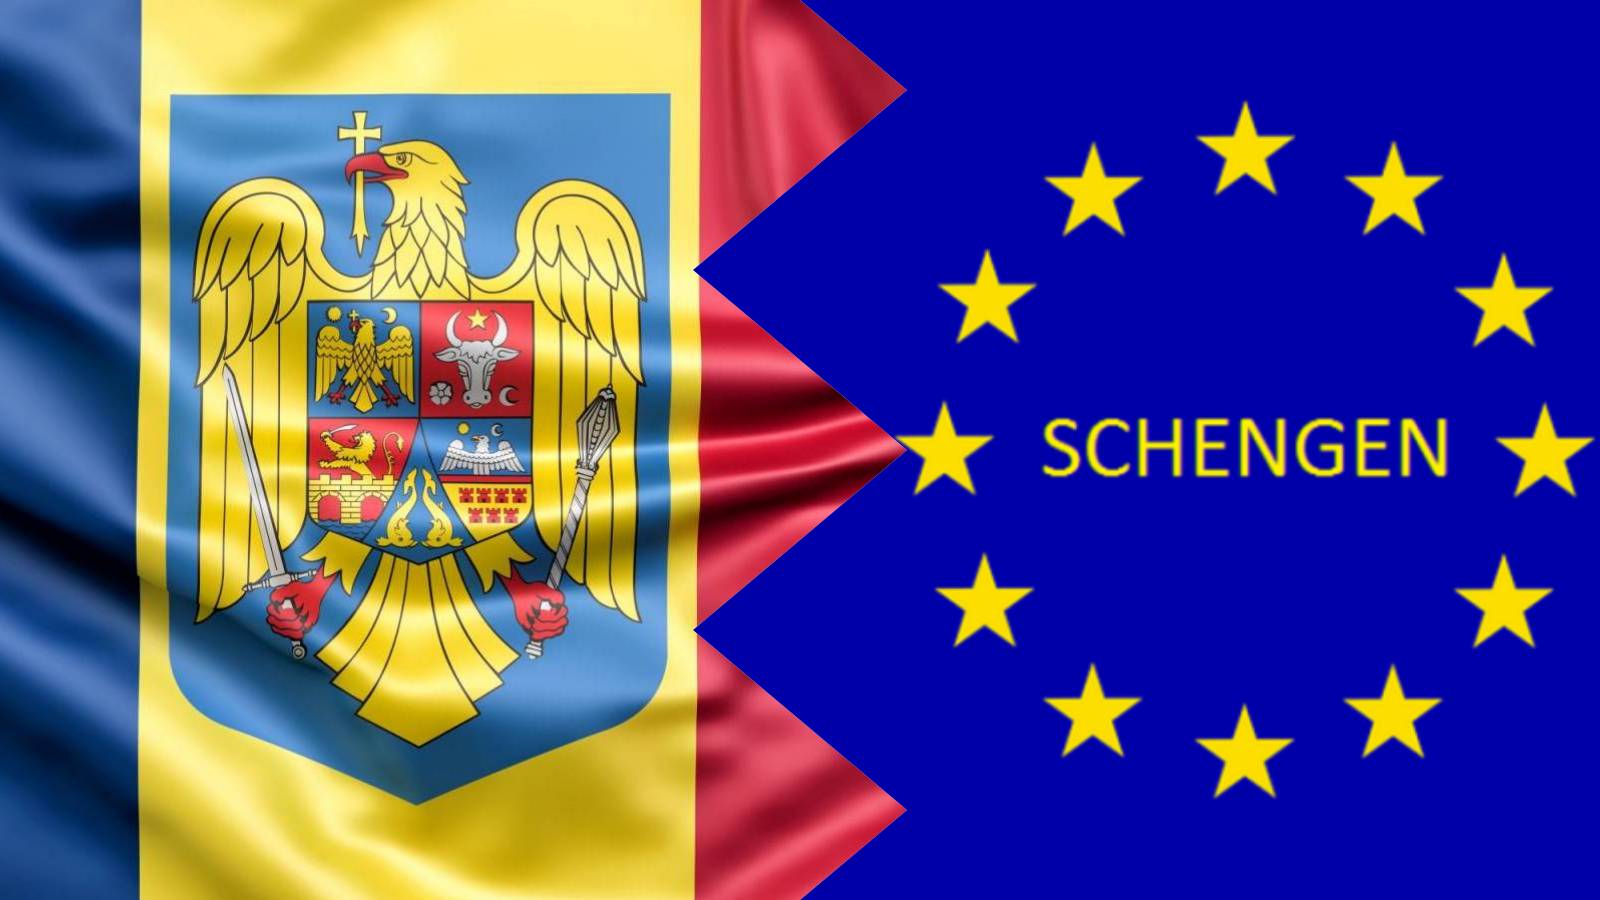 Romania Official Decisions LAST MINUTE Karl Nehammer Schengen accession